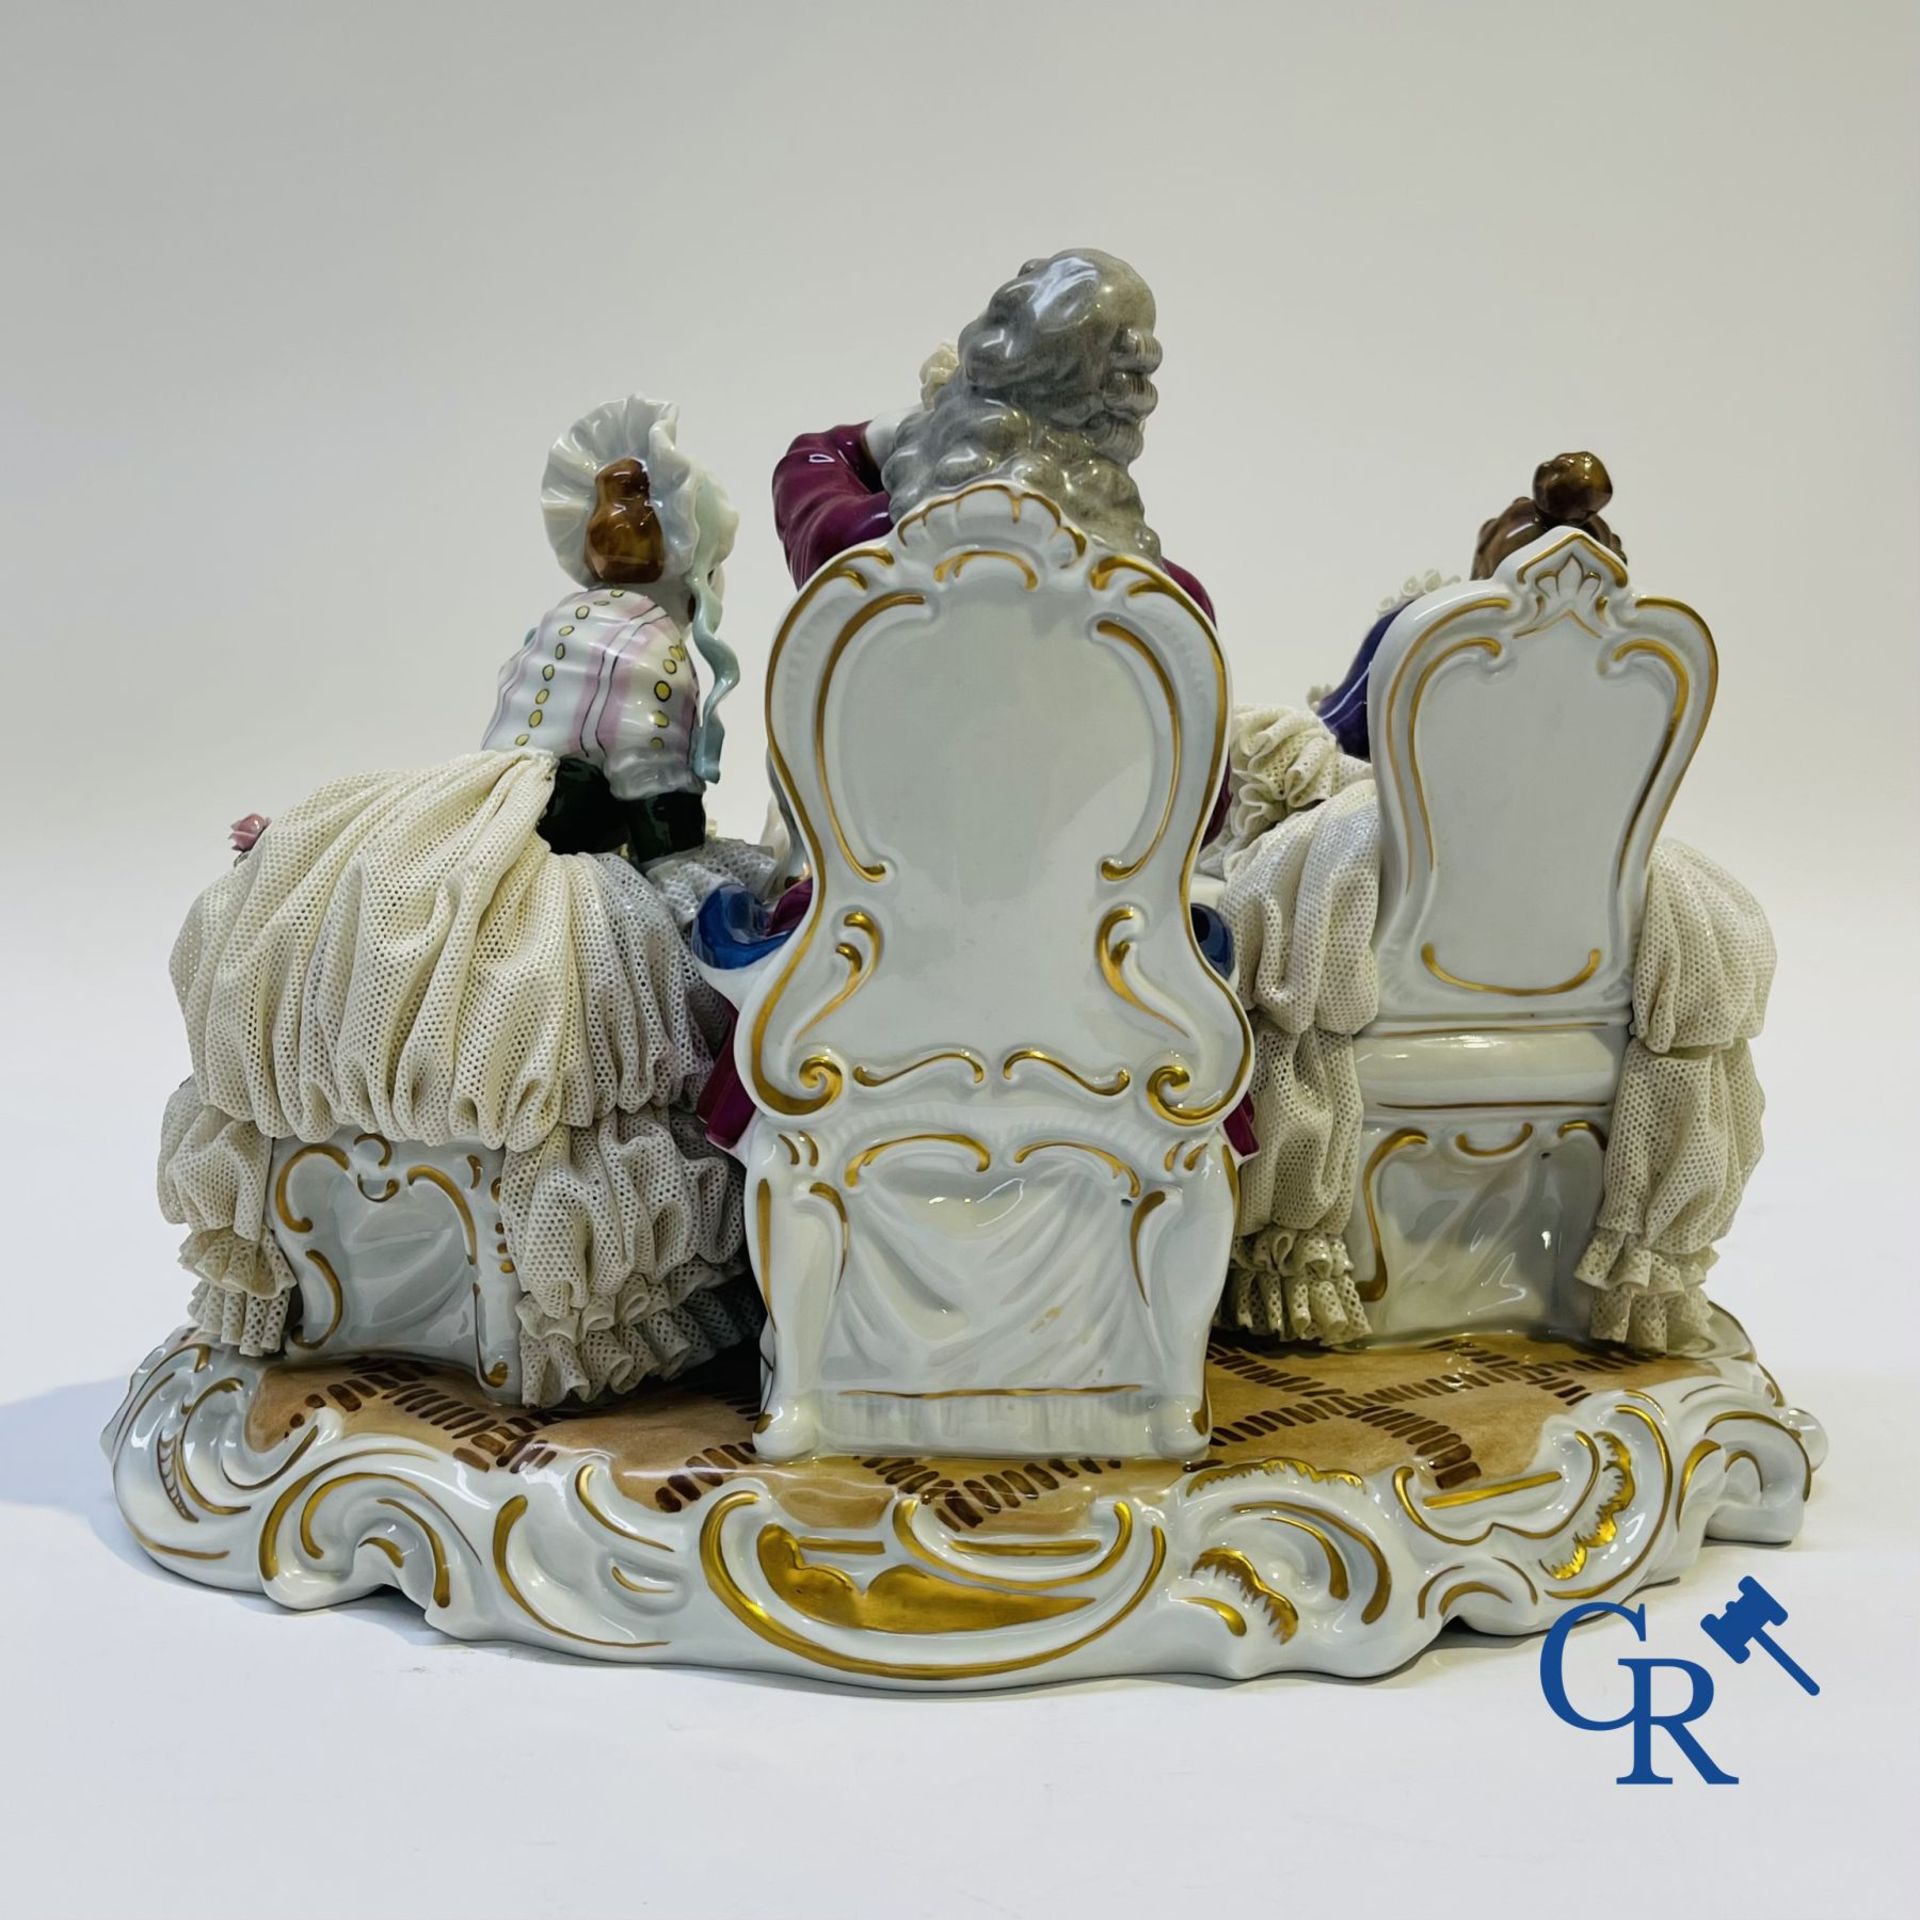 Porcelain: Unterweissbach: "In the tea room". - Image 6 of 9